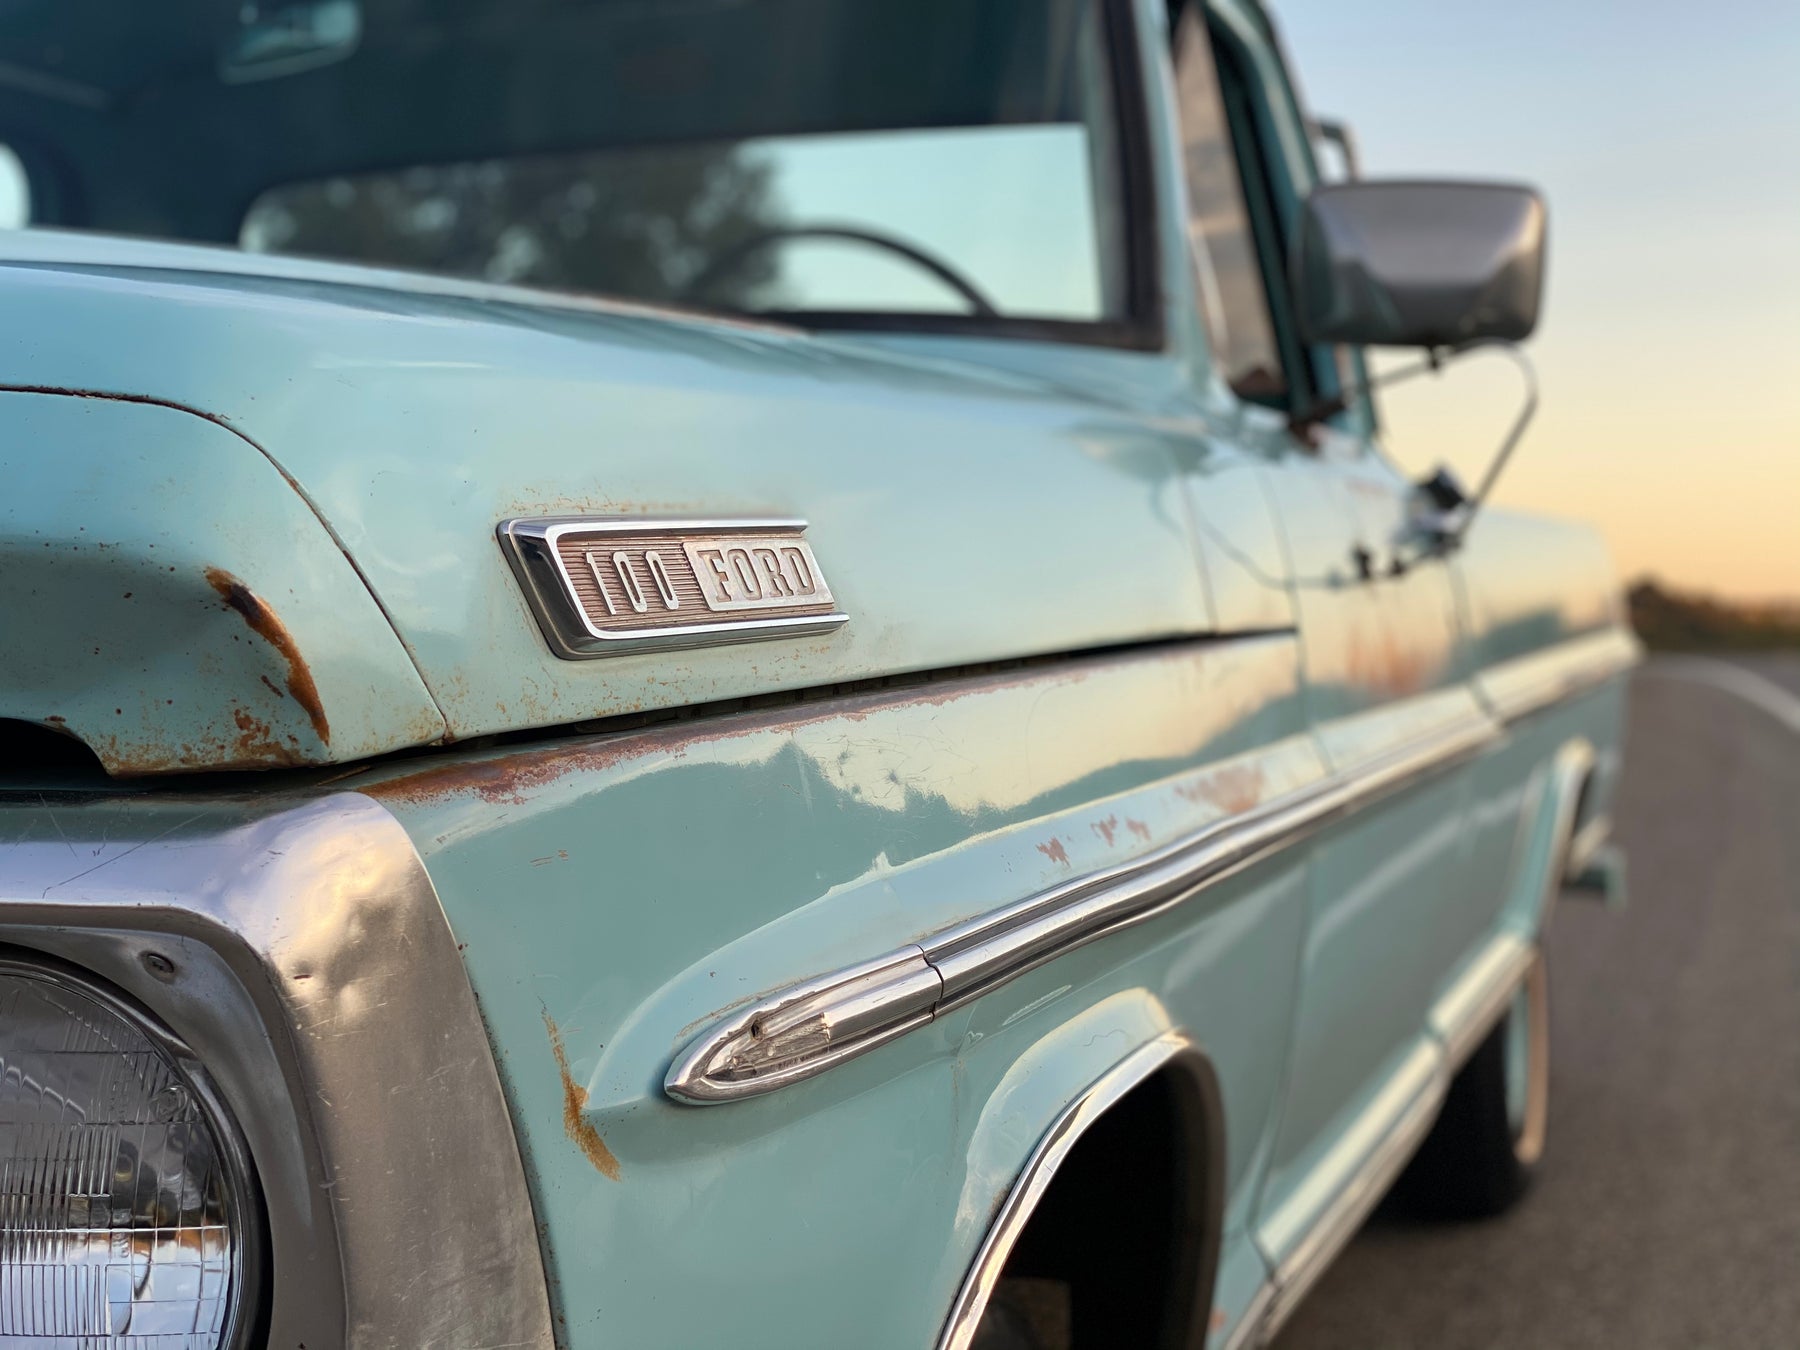 1967 Ford F-100 Frost Turquoise FINE ART PRINT